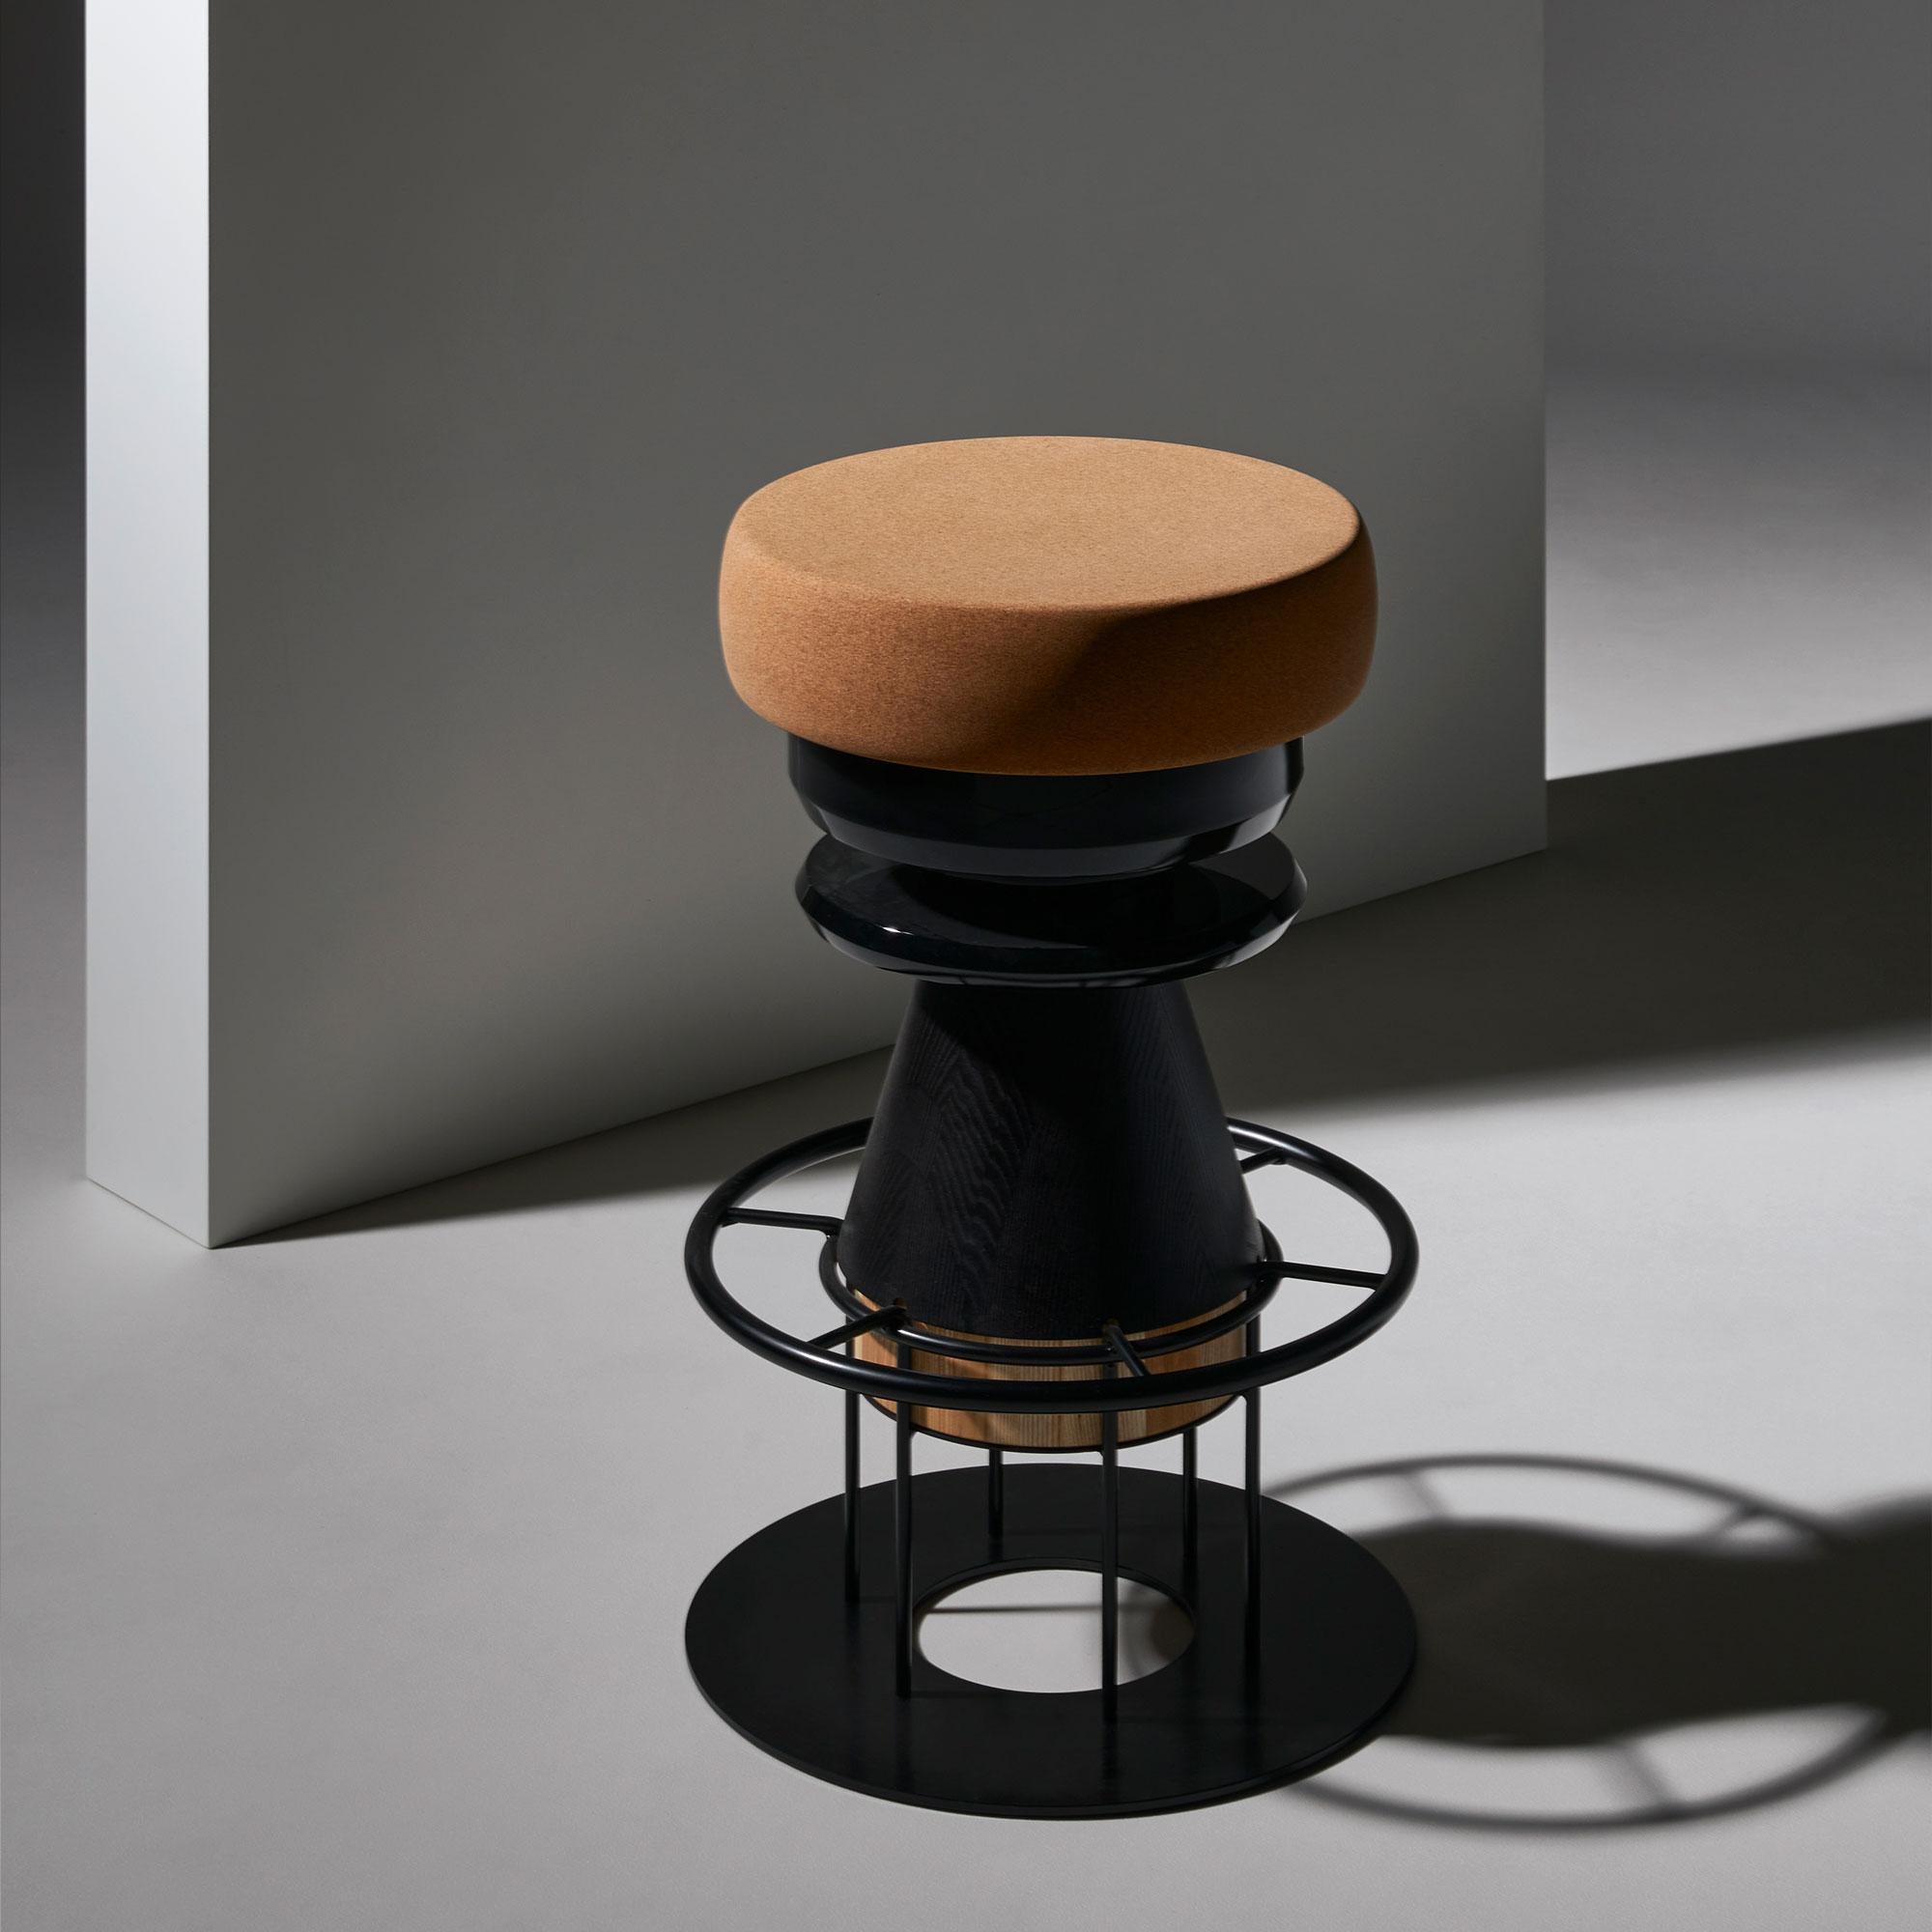 Set of 4 Medium black tembo stool, note design studio
Dimensions: D 36 x H 64 cm
Materials: Lacquered steel structure, solid wood (beech) and lacquered MDF, natural cork base.
Available in colorful version and in 3 sizes: H 46, H 64, H 76